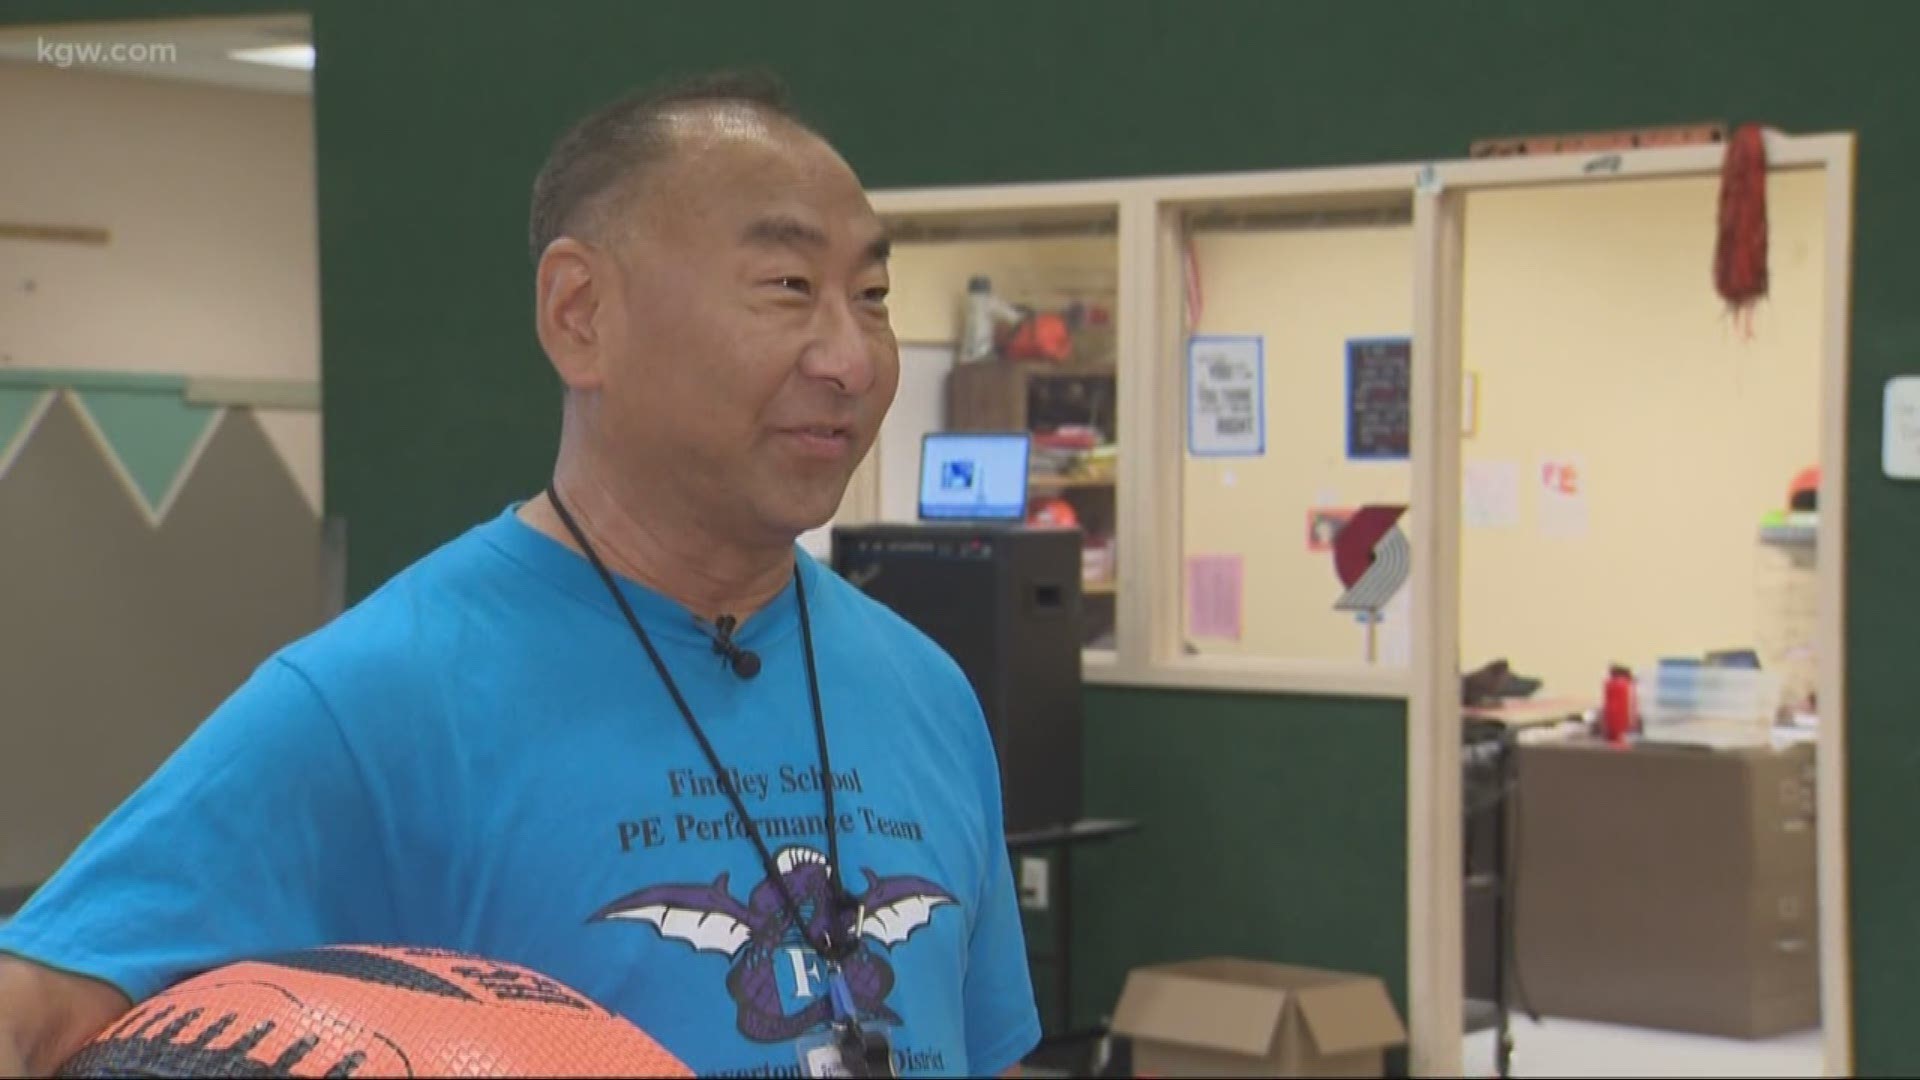 Jon Onishi, a PE teacher at Findley Elementary School chats with KGW Sunrise anchor Brenda Braxton about his enthusiasm for the job and students